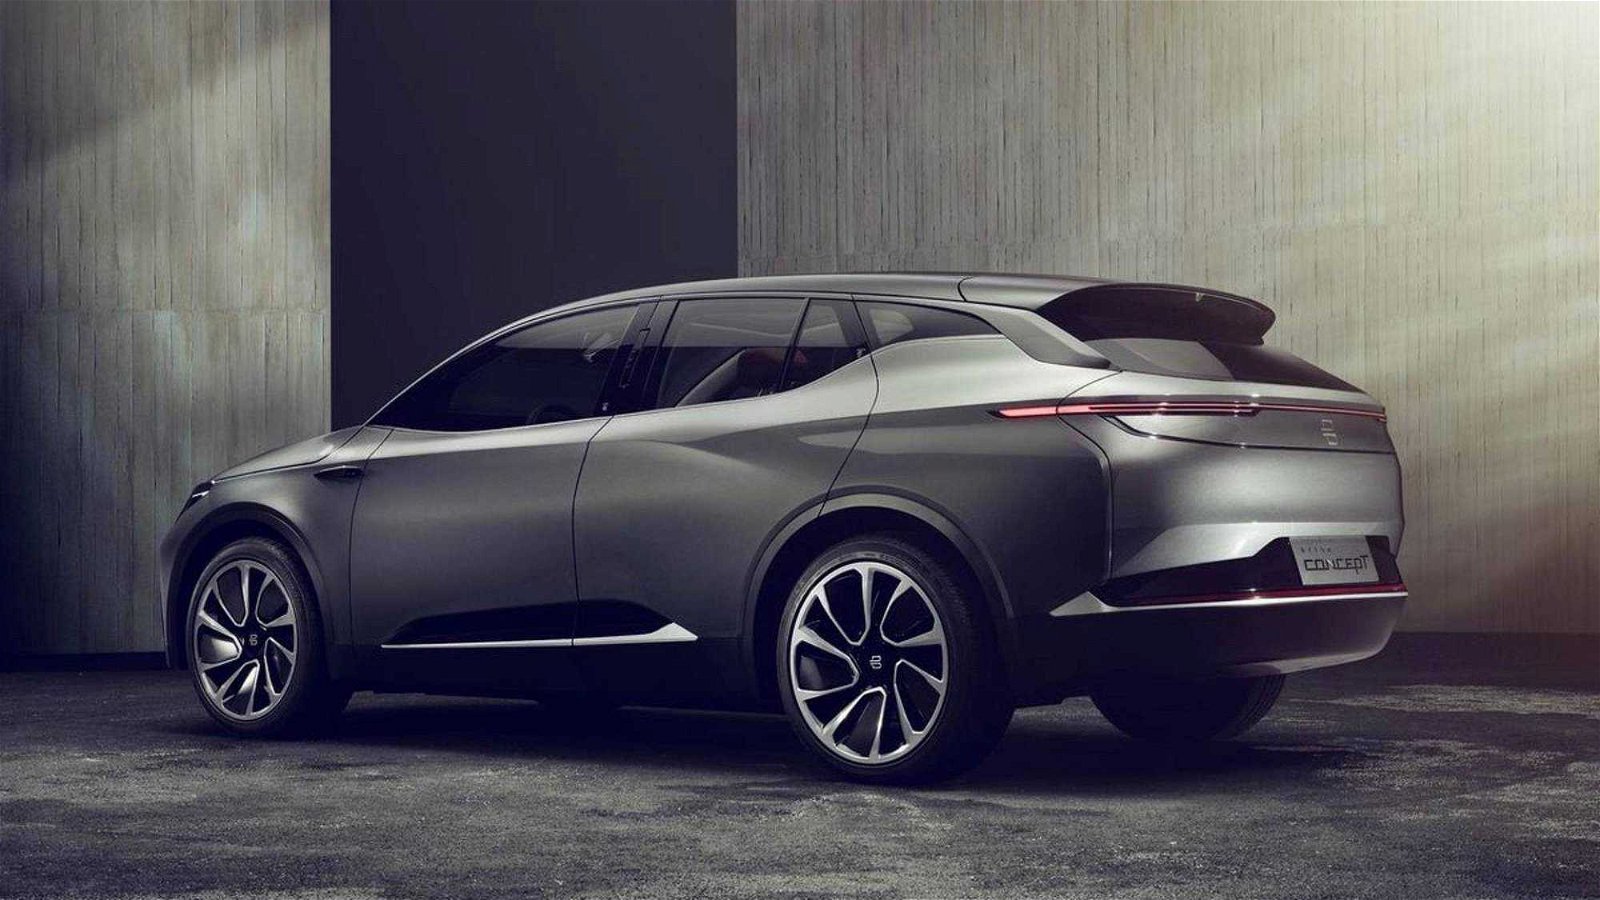 concept-byton-SUV-electric-7